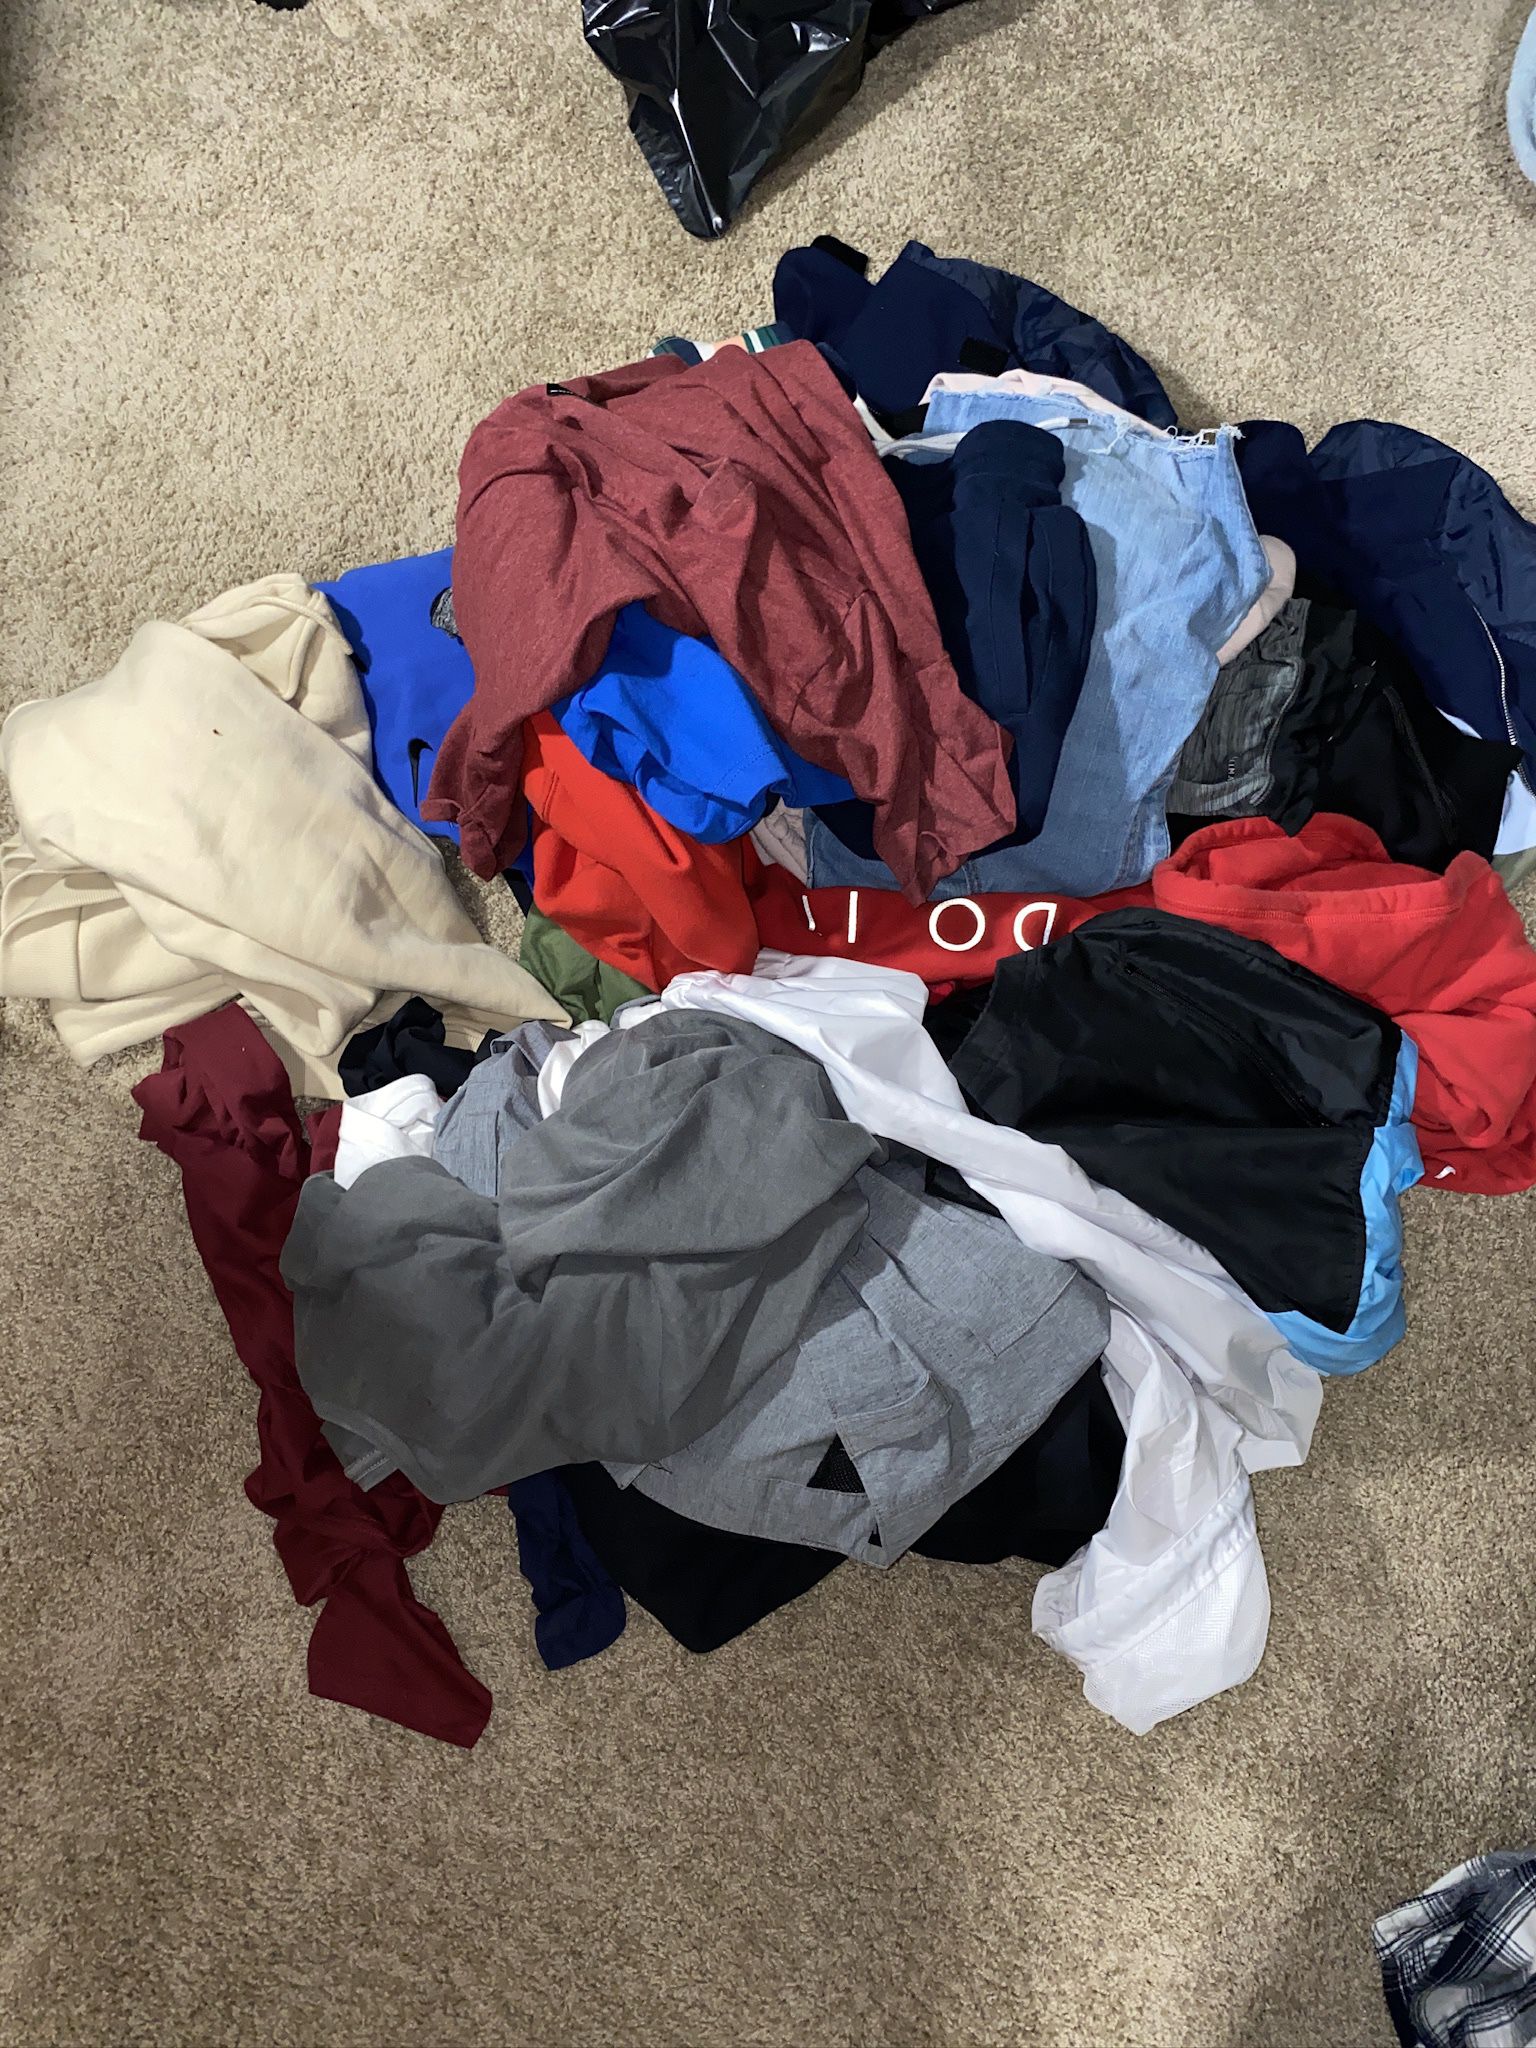 Pile of clothes-mix of long sleeves, hoodies, jackets, shorts, and short sleeves